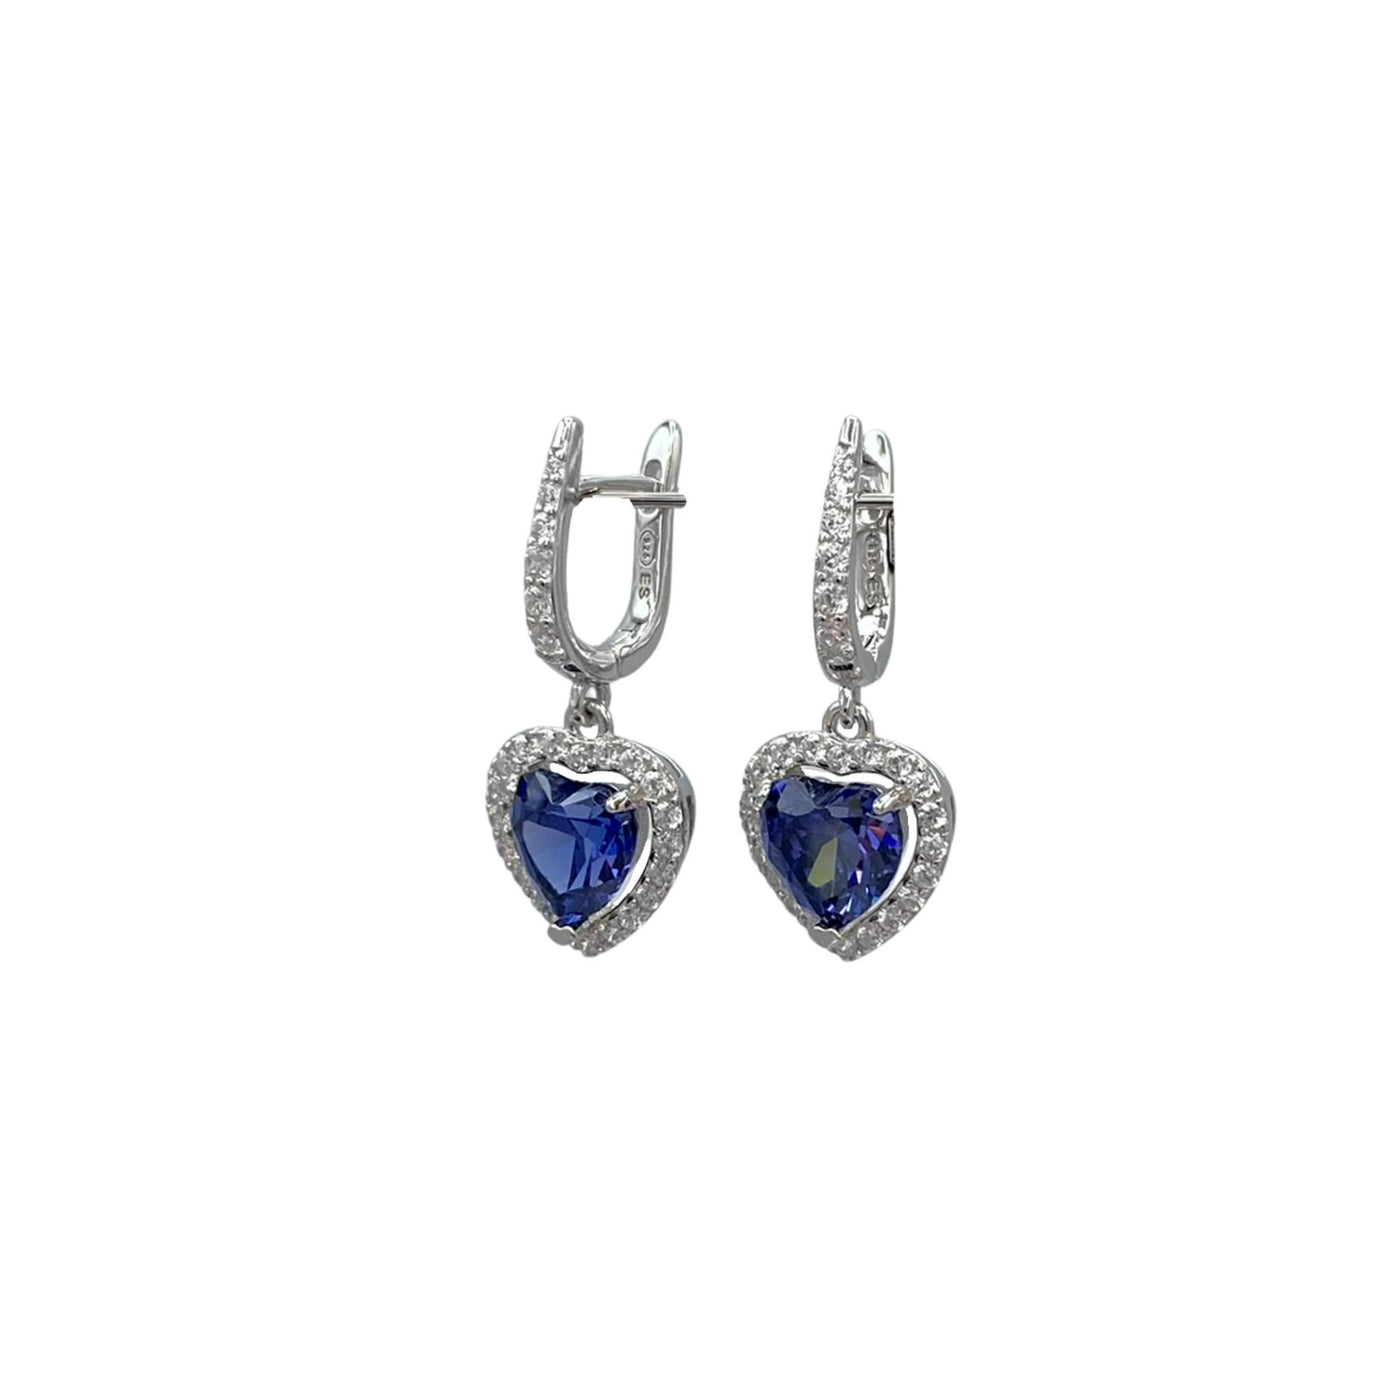 Silver hoop earrings with heart charms